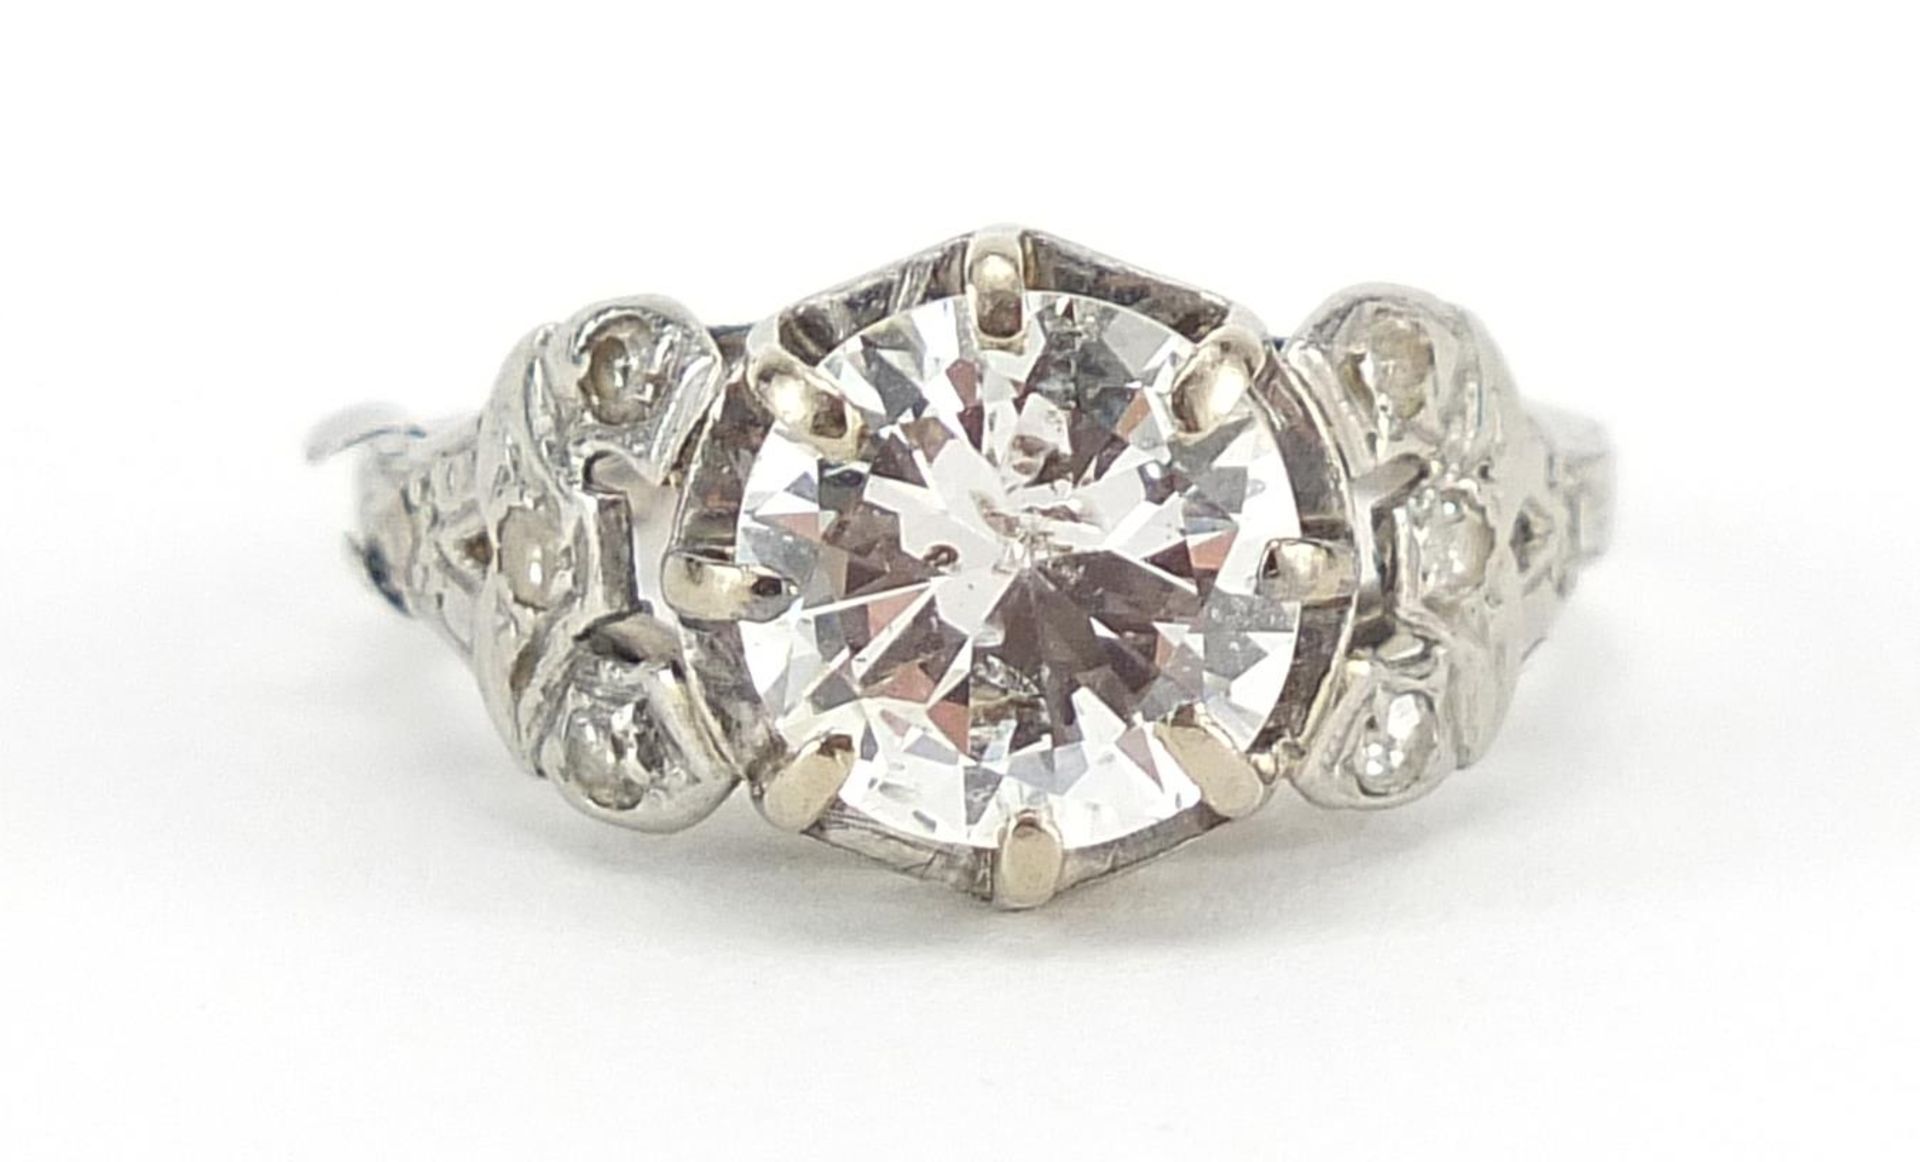 Platinum diamond ring with ornate shoulders, the central diamond approximately 1.8 carat, size I,